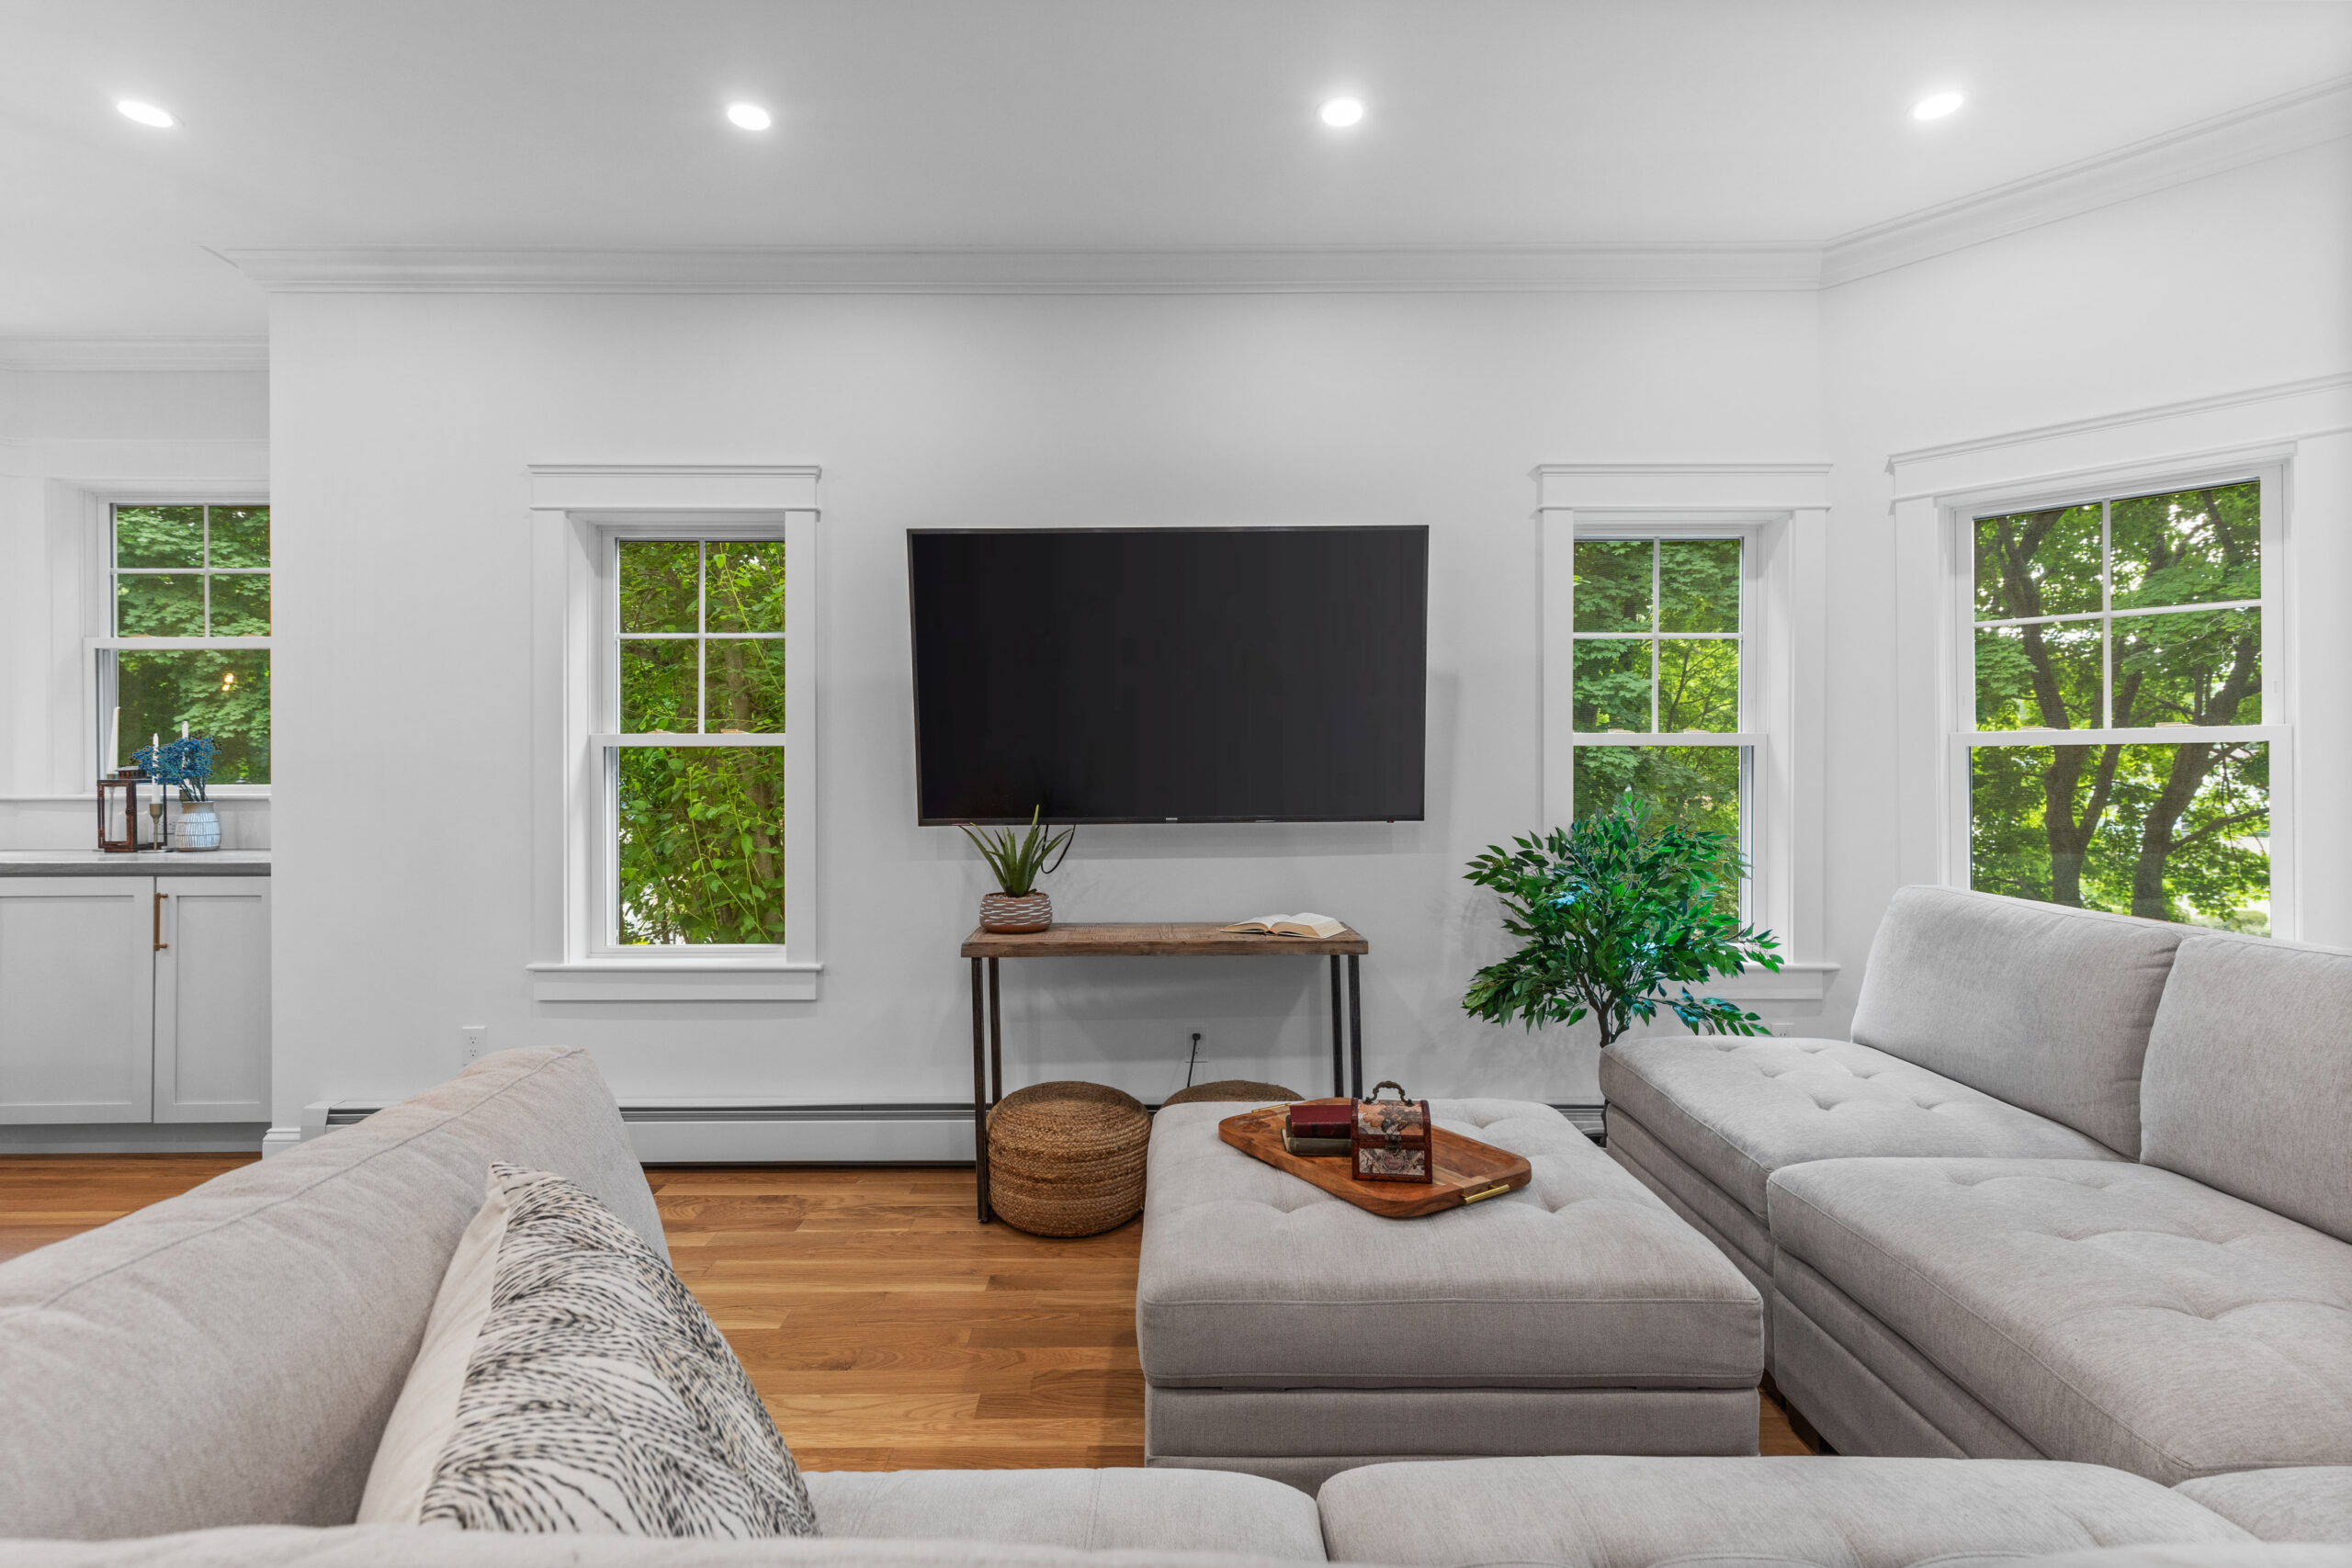 Image of a newly renovated living room in a vintage New England home. The room features a wall-mounted flat-screen TV between two large windows, allowing natural light to illuminate the space. A cozy sectional sofa with neutral-colored upholstery and decorative pillows faces the TV. The hardwood flooring adds warmth, while a side table with potted plants and woven baskets underneath enhances the modern yet comfortable aesthetic. The walls are painted white, providing a clean and bright atmosphere.